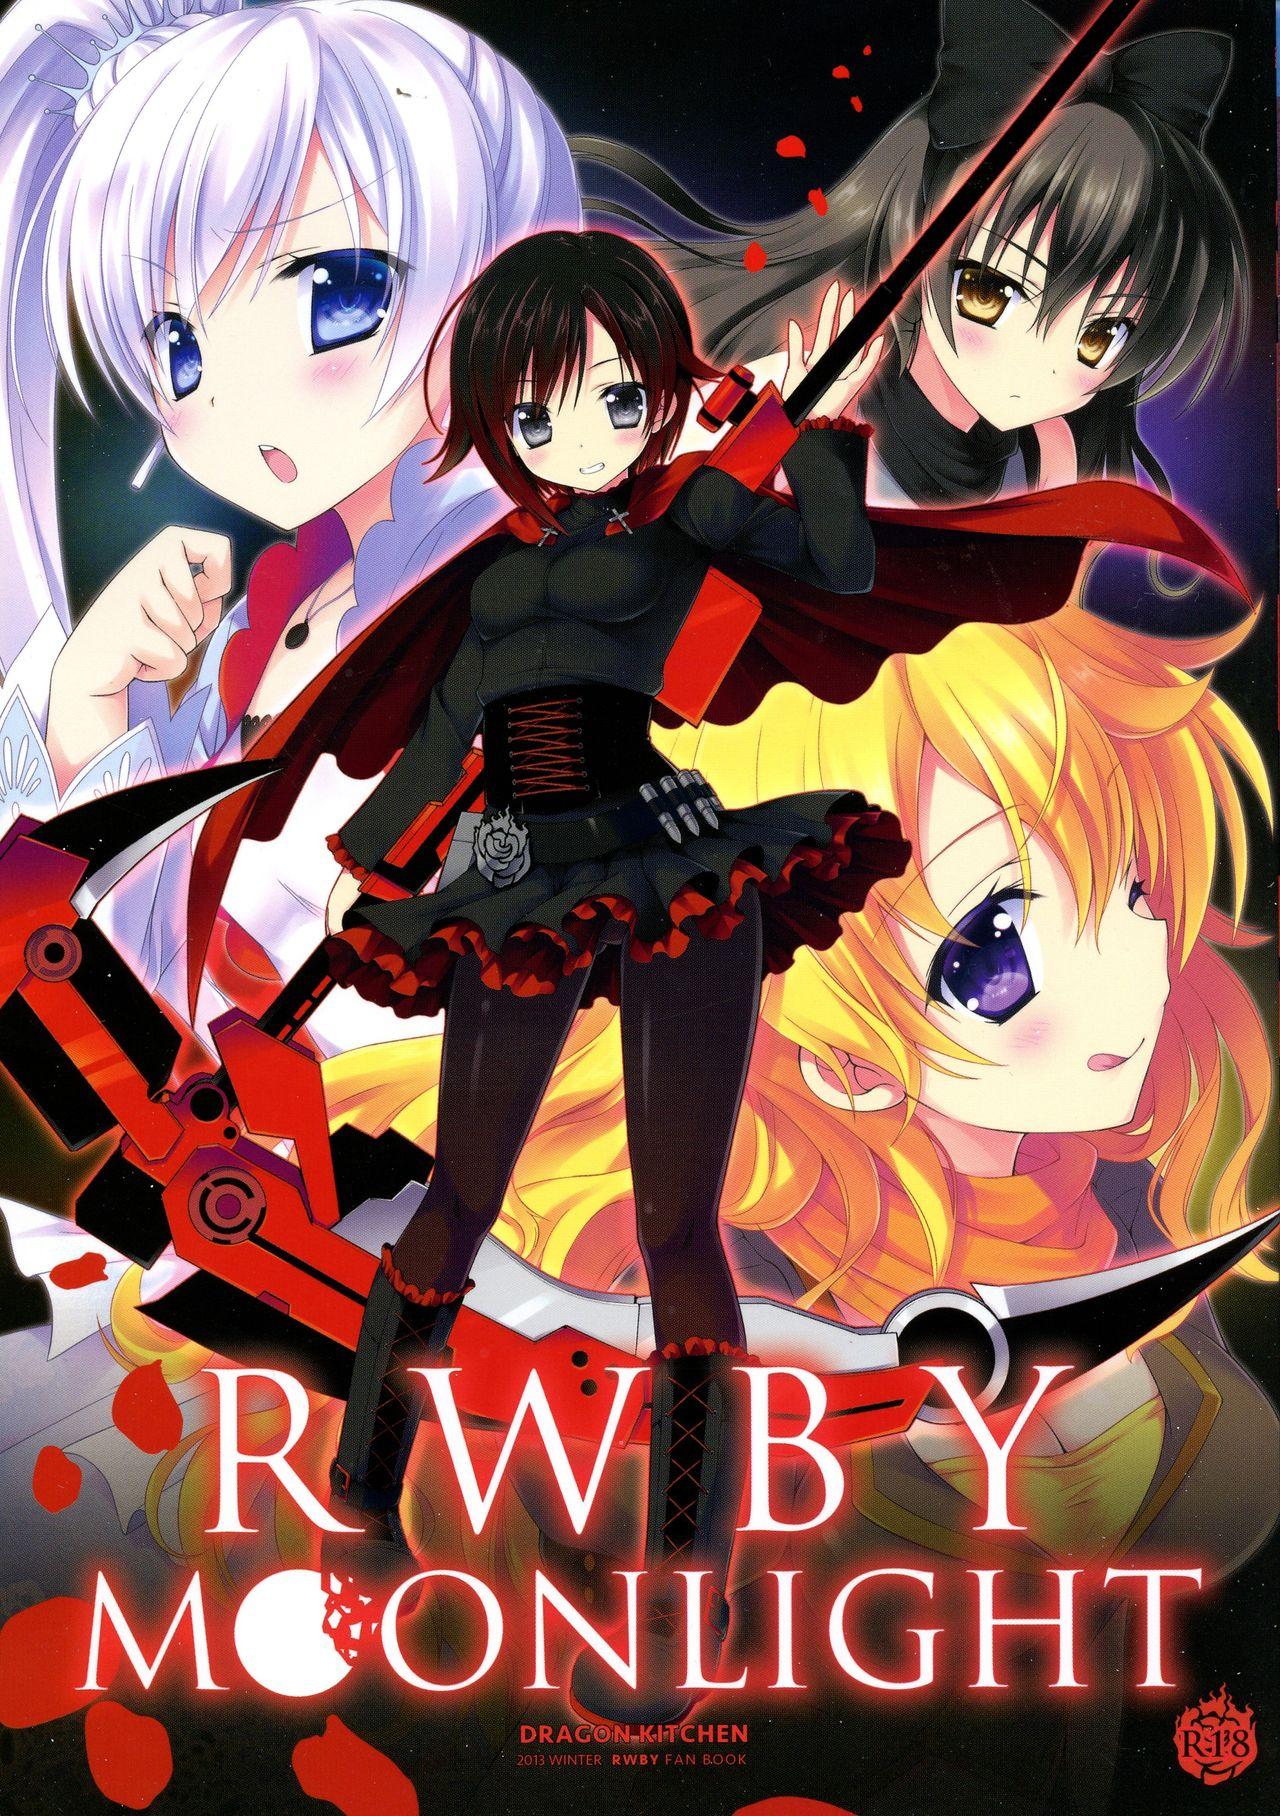 Argentina RWBY MOONLIGHT - Rwby Webcamshow - Page 1